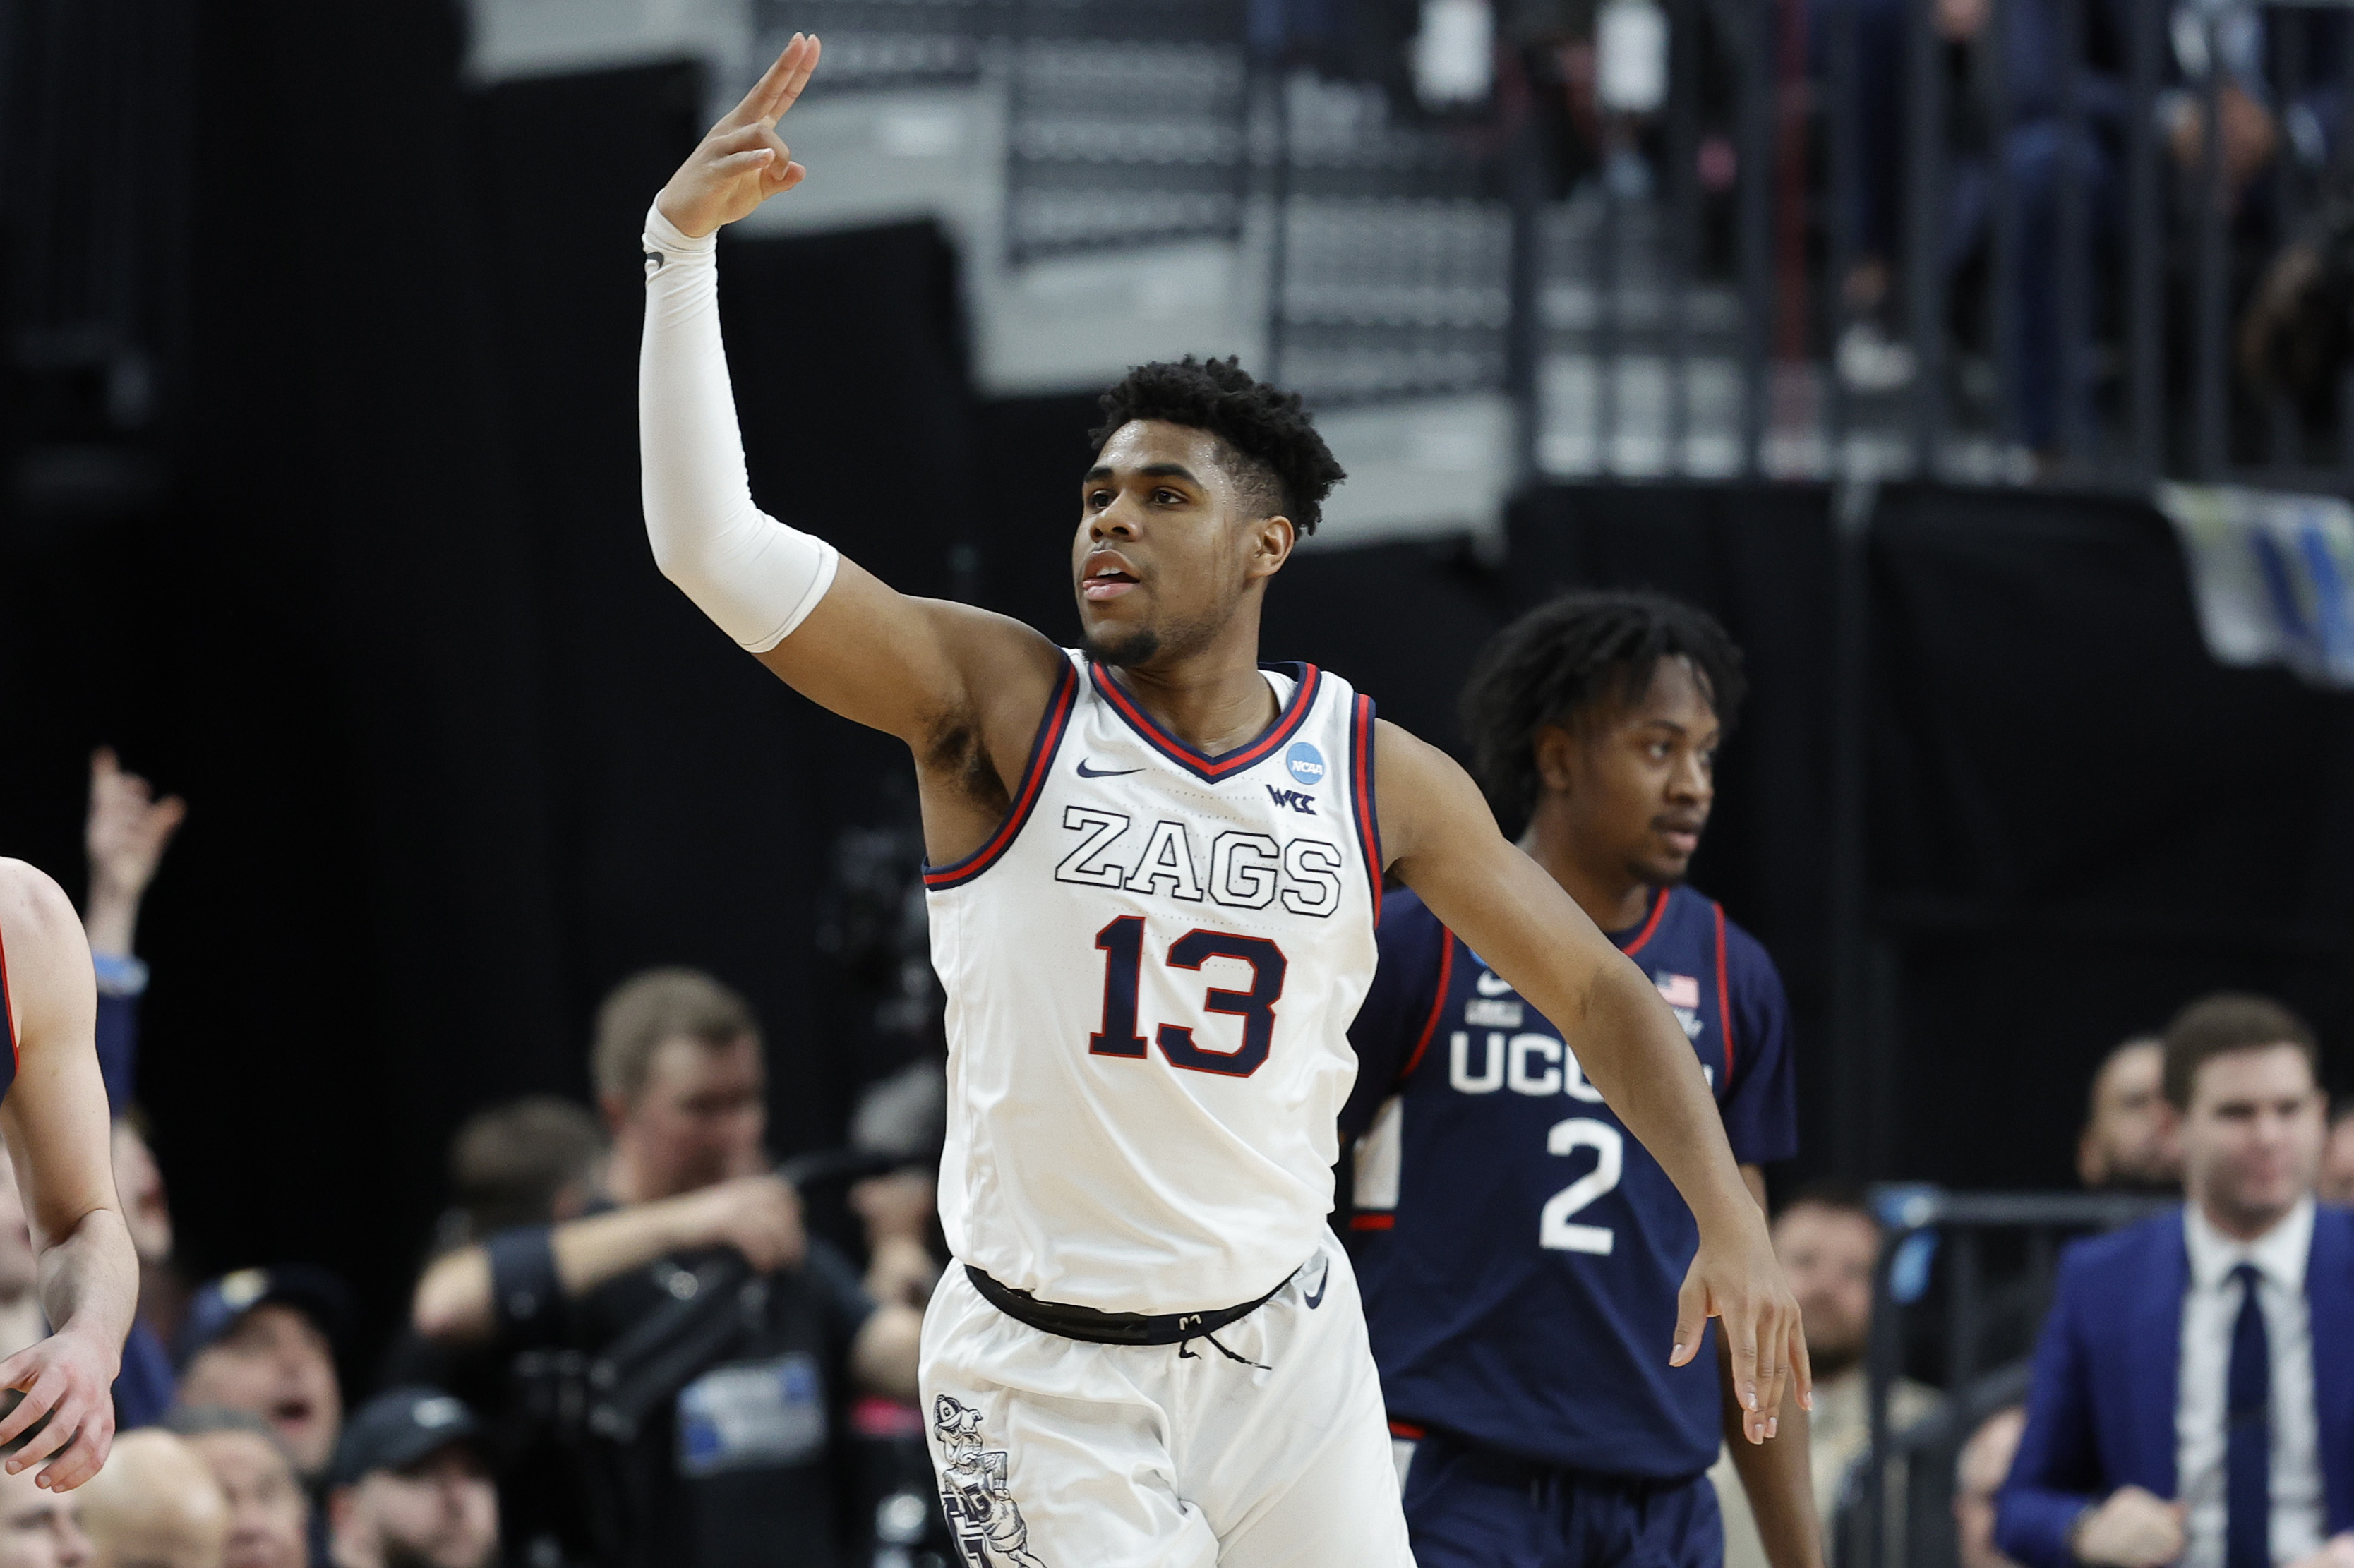 Malachi Smith #13 of the Gonzaga Bulldogs reacts after a made basket during the first half against the Connecticut Huskies in the Elite Eight round of the NCAA Men’s Basketball Tournament at T-Mobile Arena on March 25, 2023 in Las Vegas, Nevada.